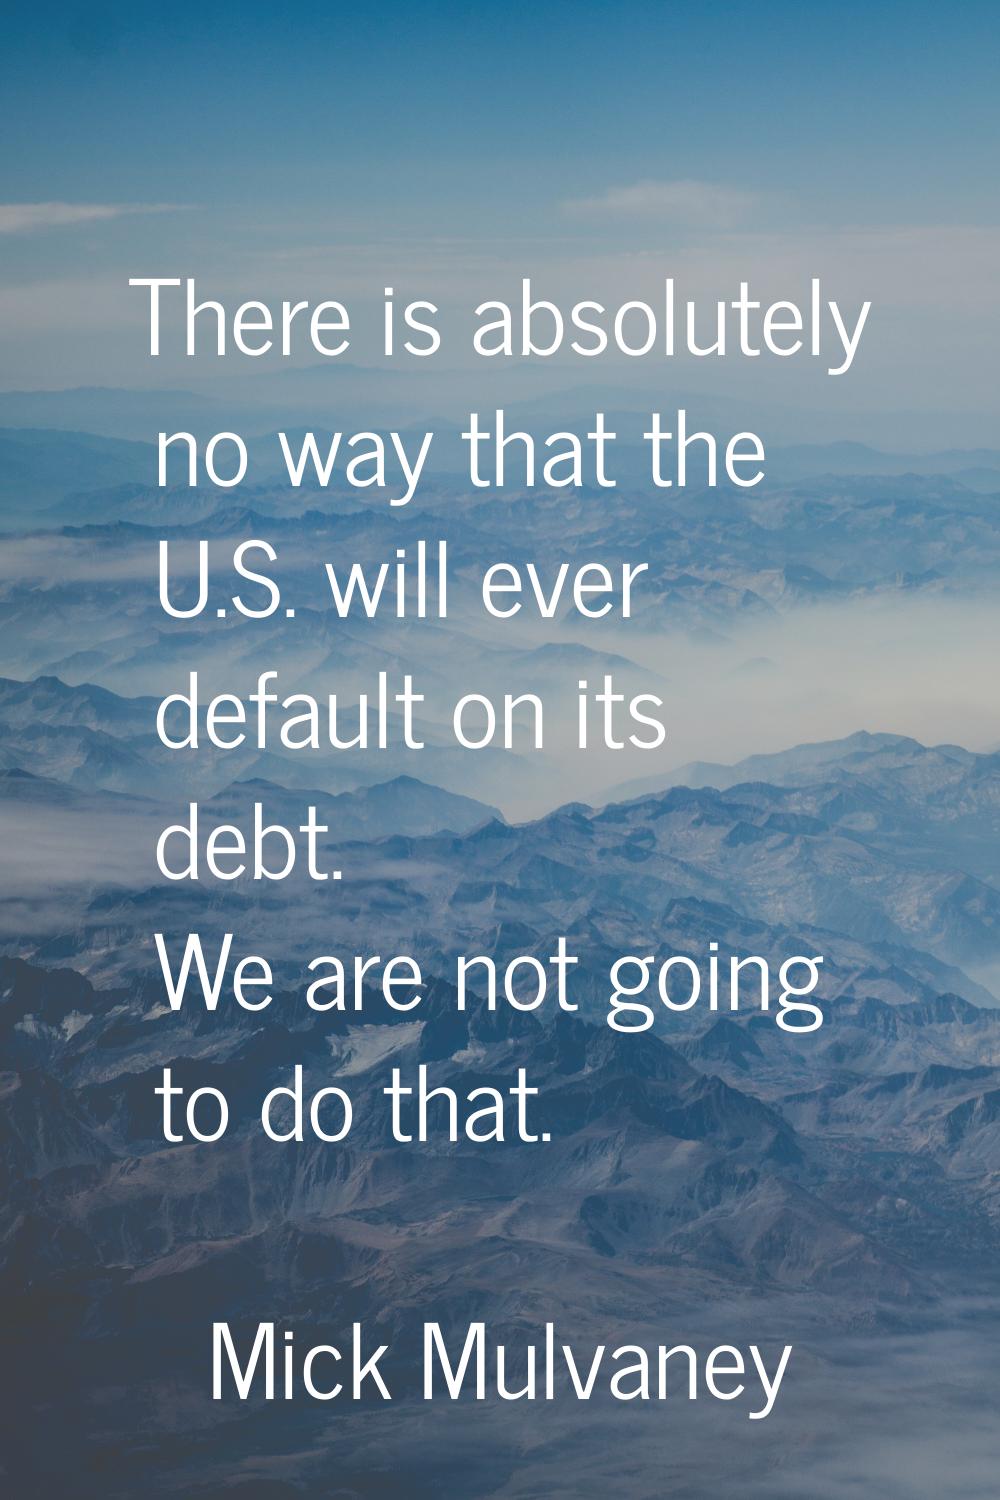 There is absolutely no way that the U.S. will ever default on its debt. We are not going to do that